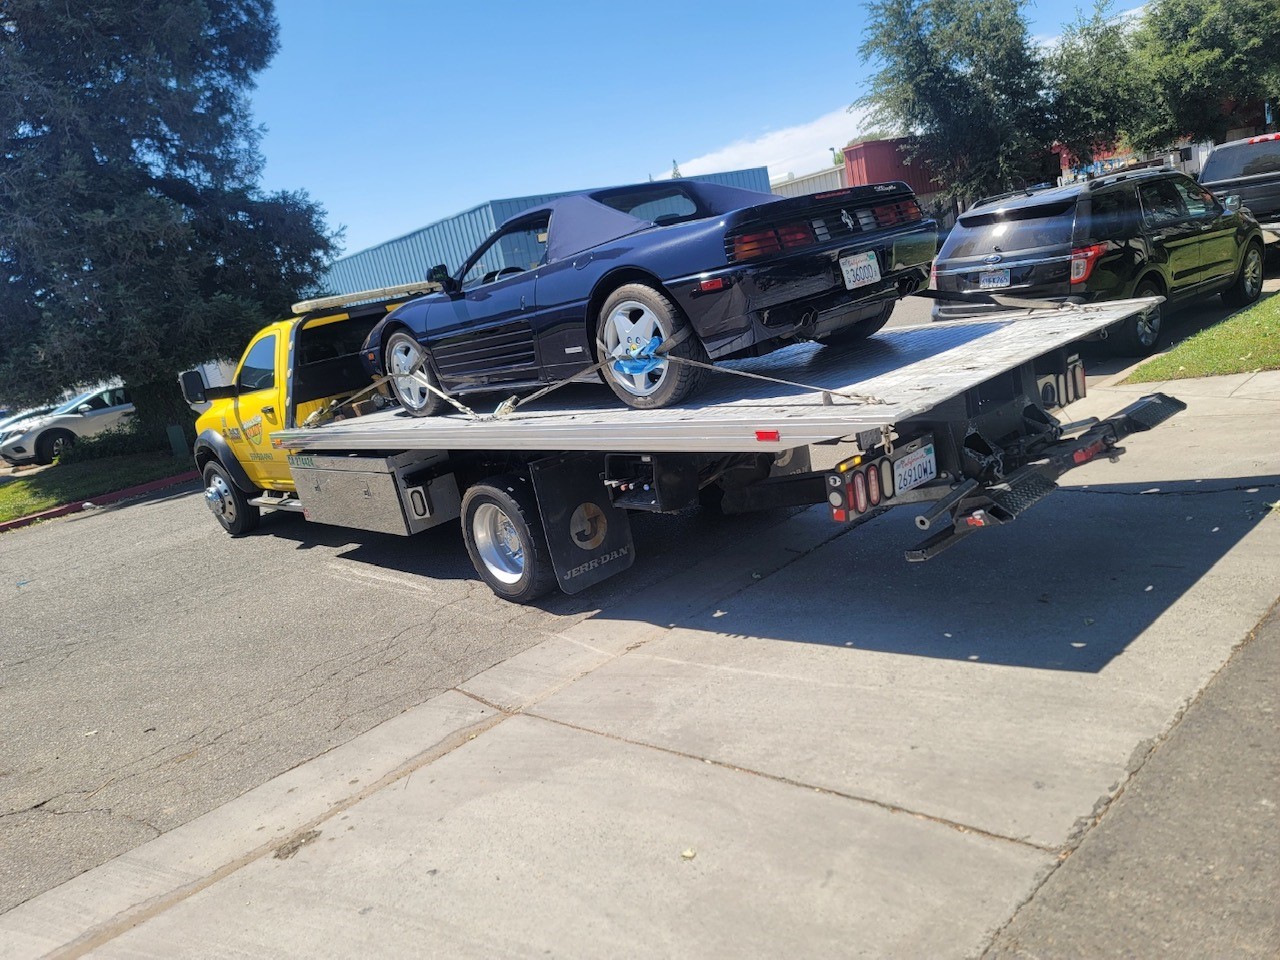 All Pro Towing